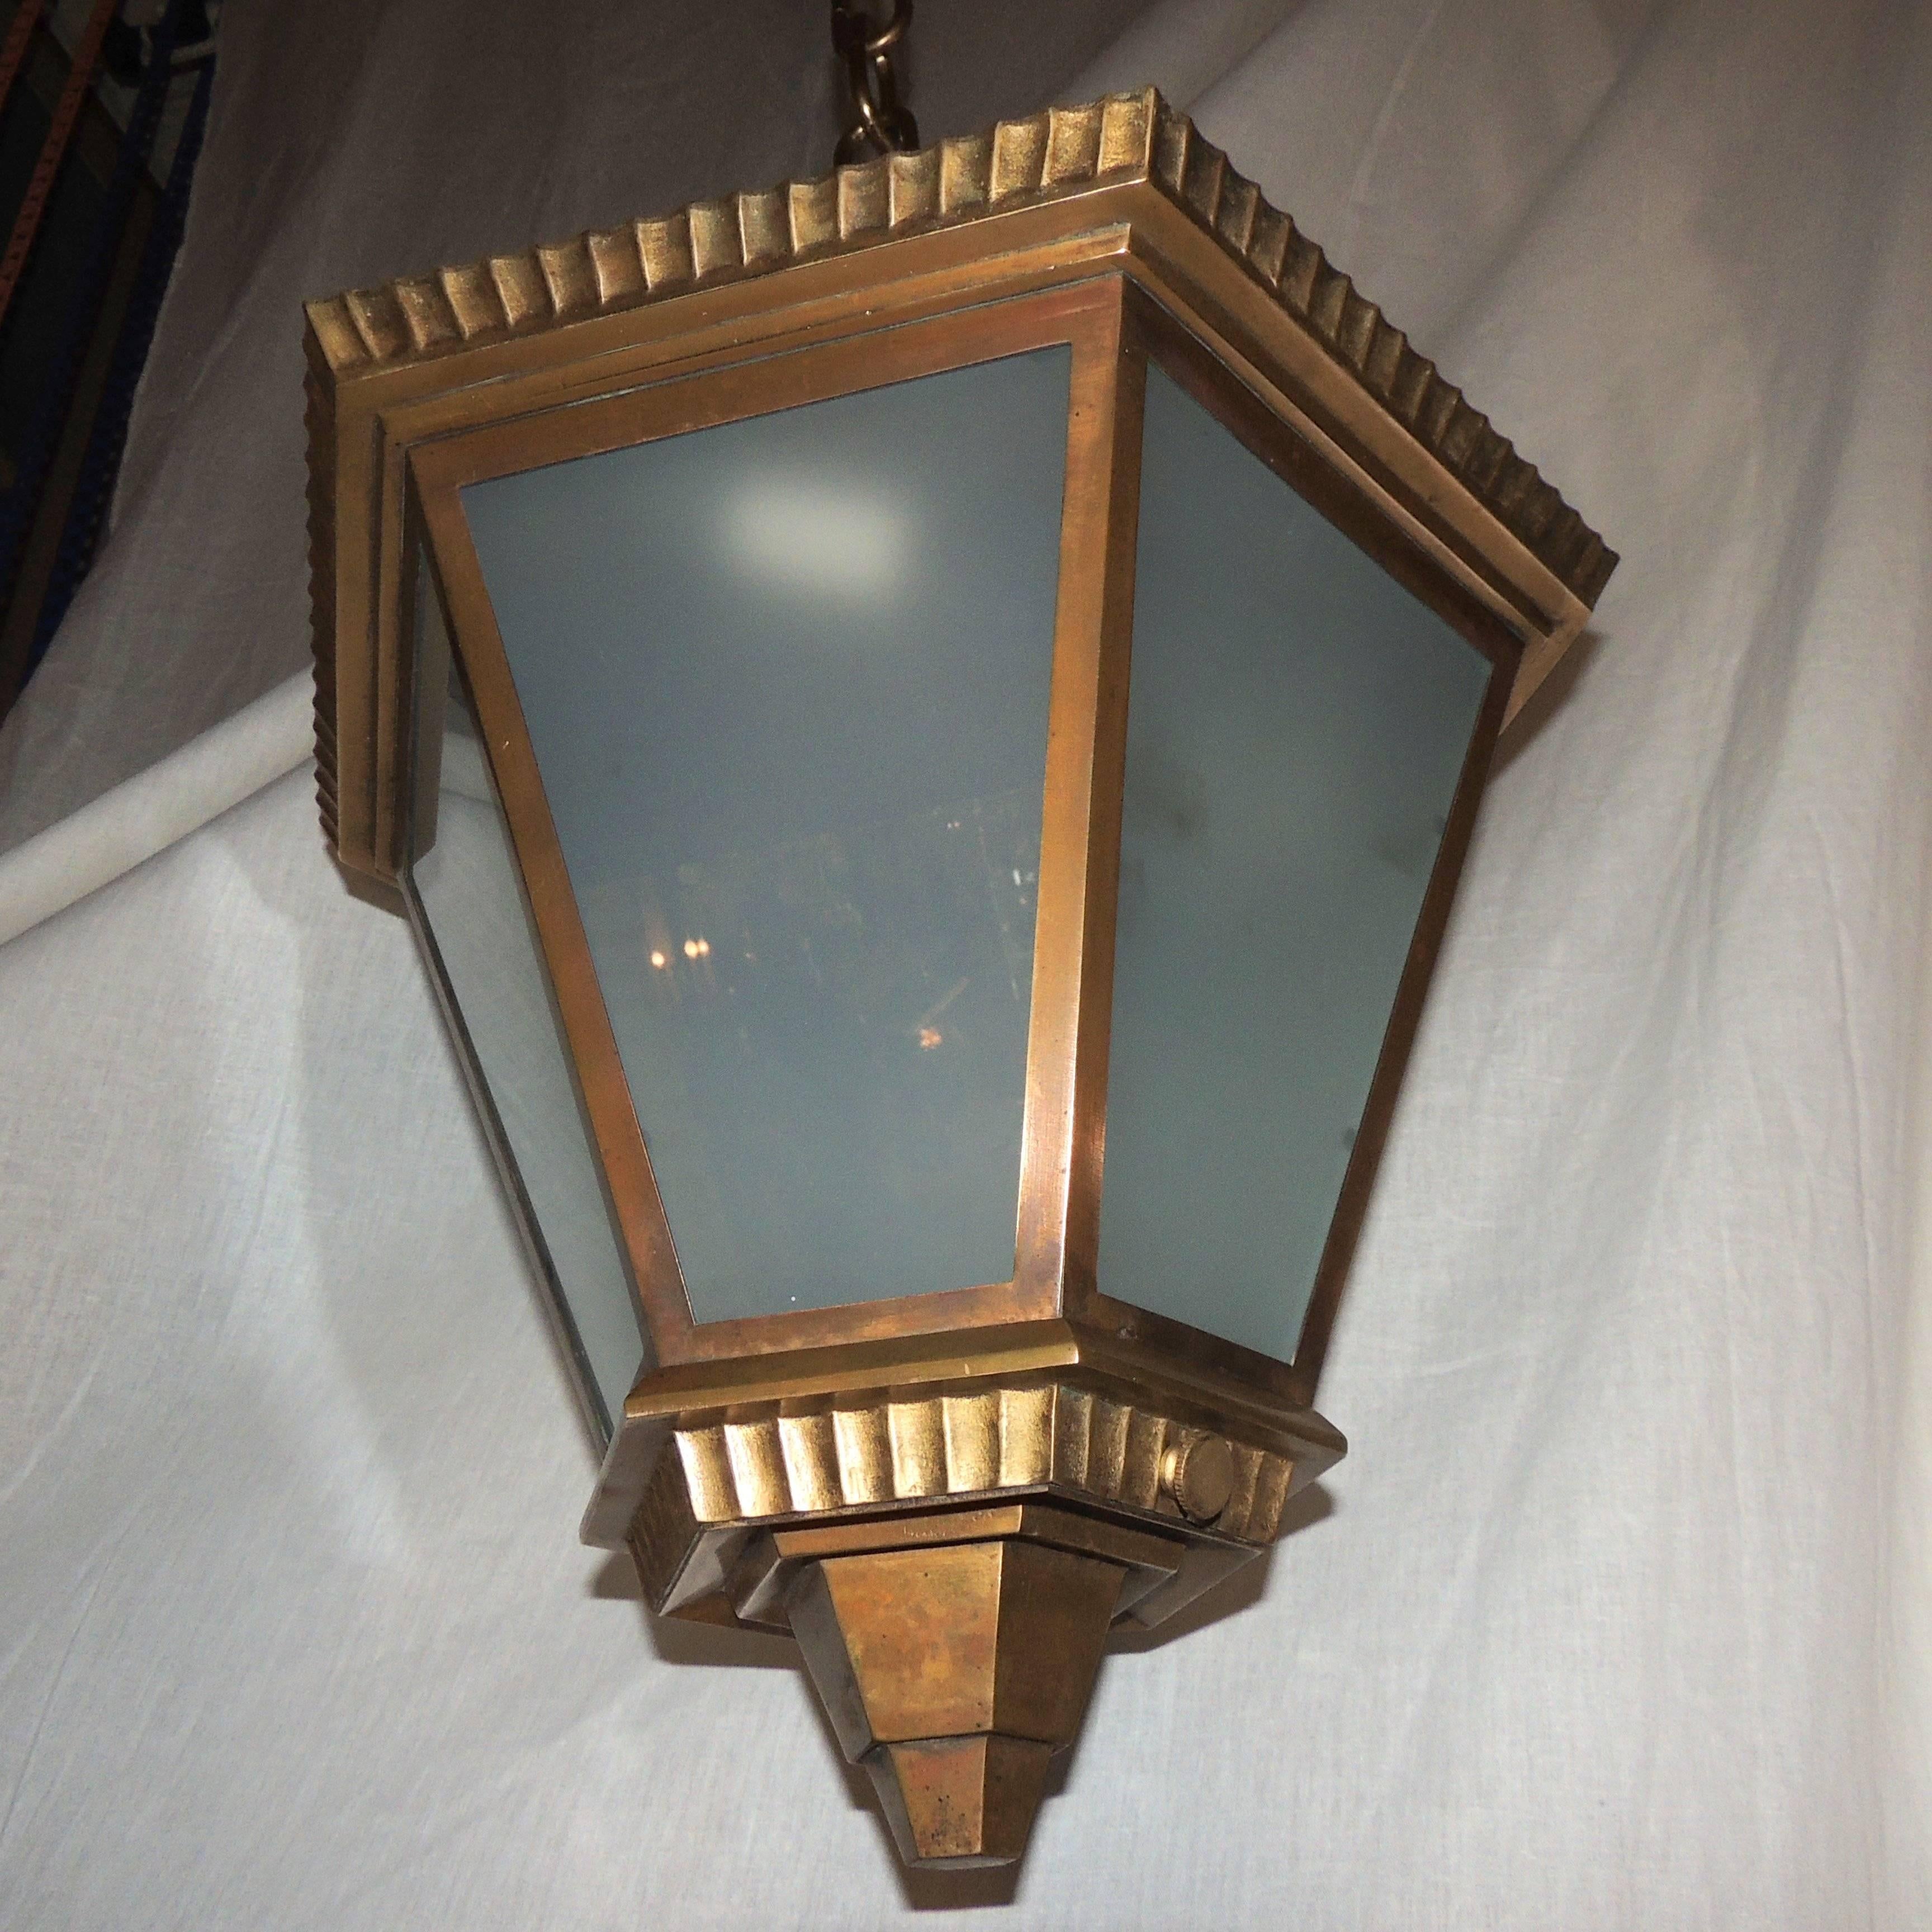 Wonderful Art Deco Bronze Frosted Glass Hexagon Flush Mount Pendent Fixture In Good Condition For Sale In Roslyn, NY